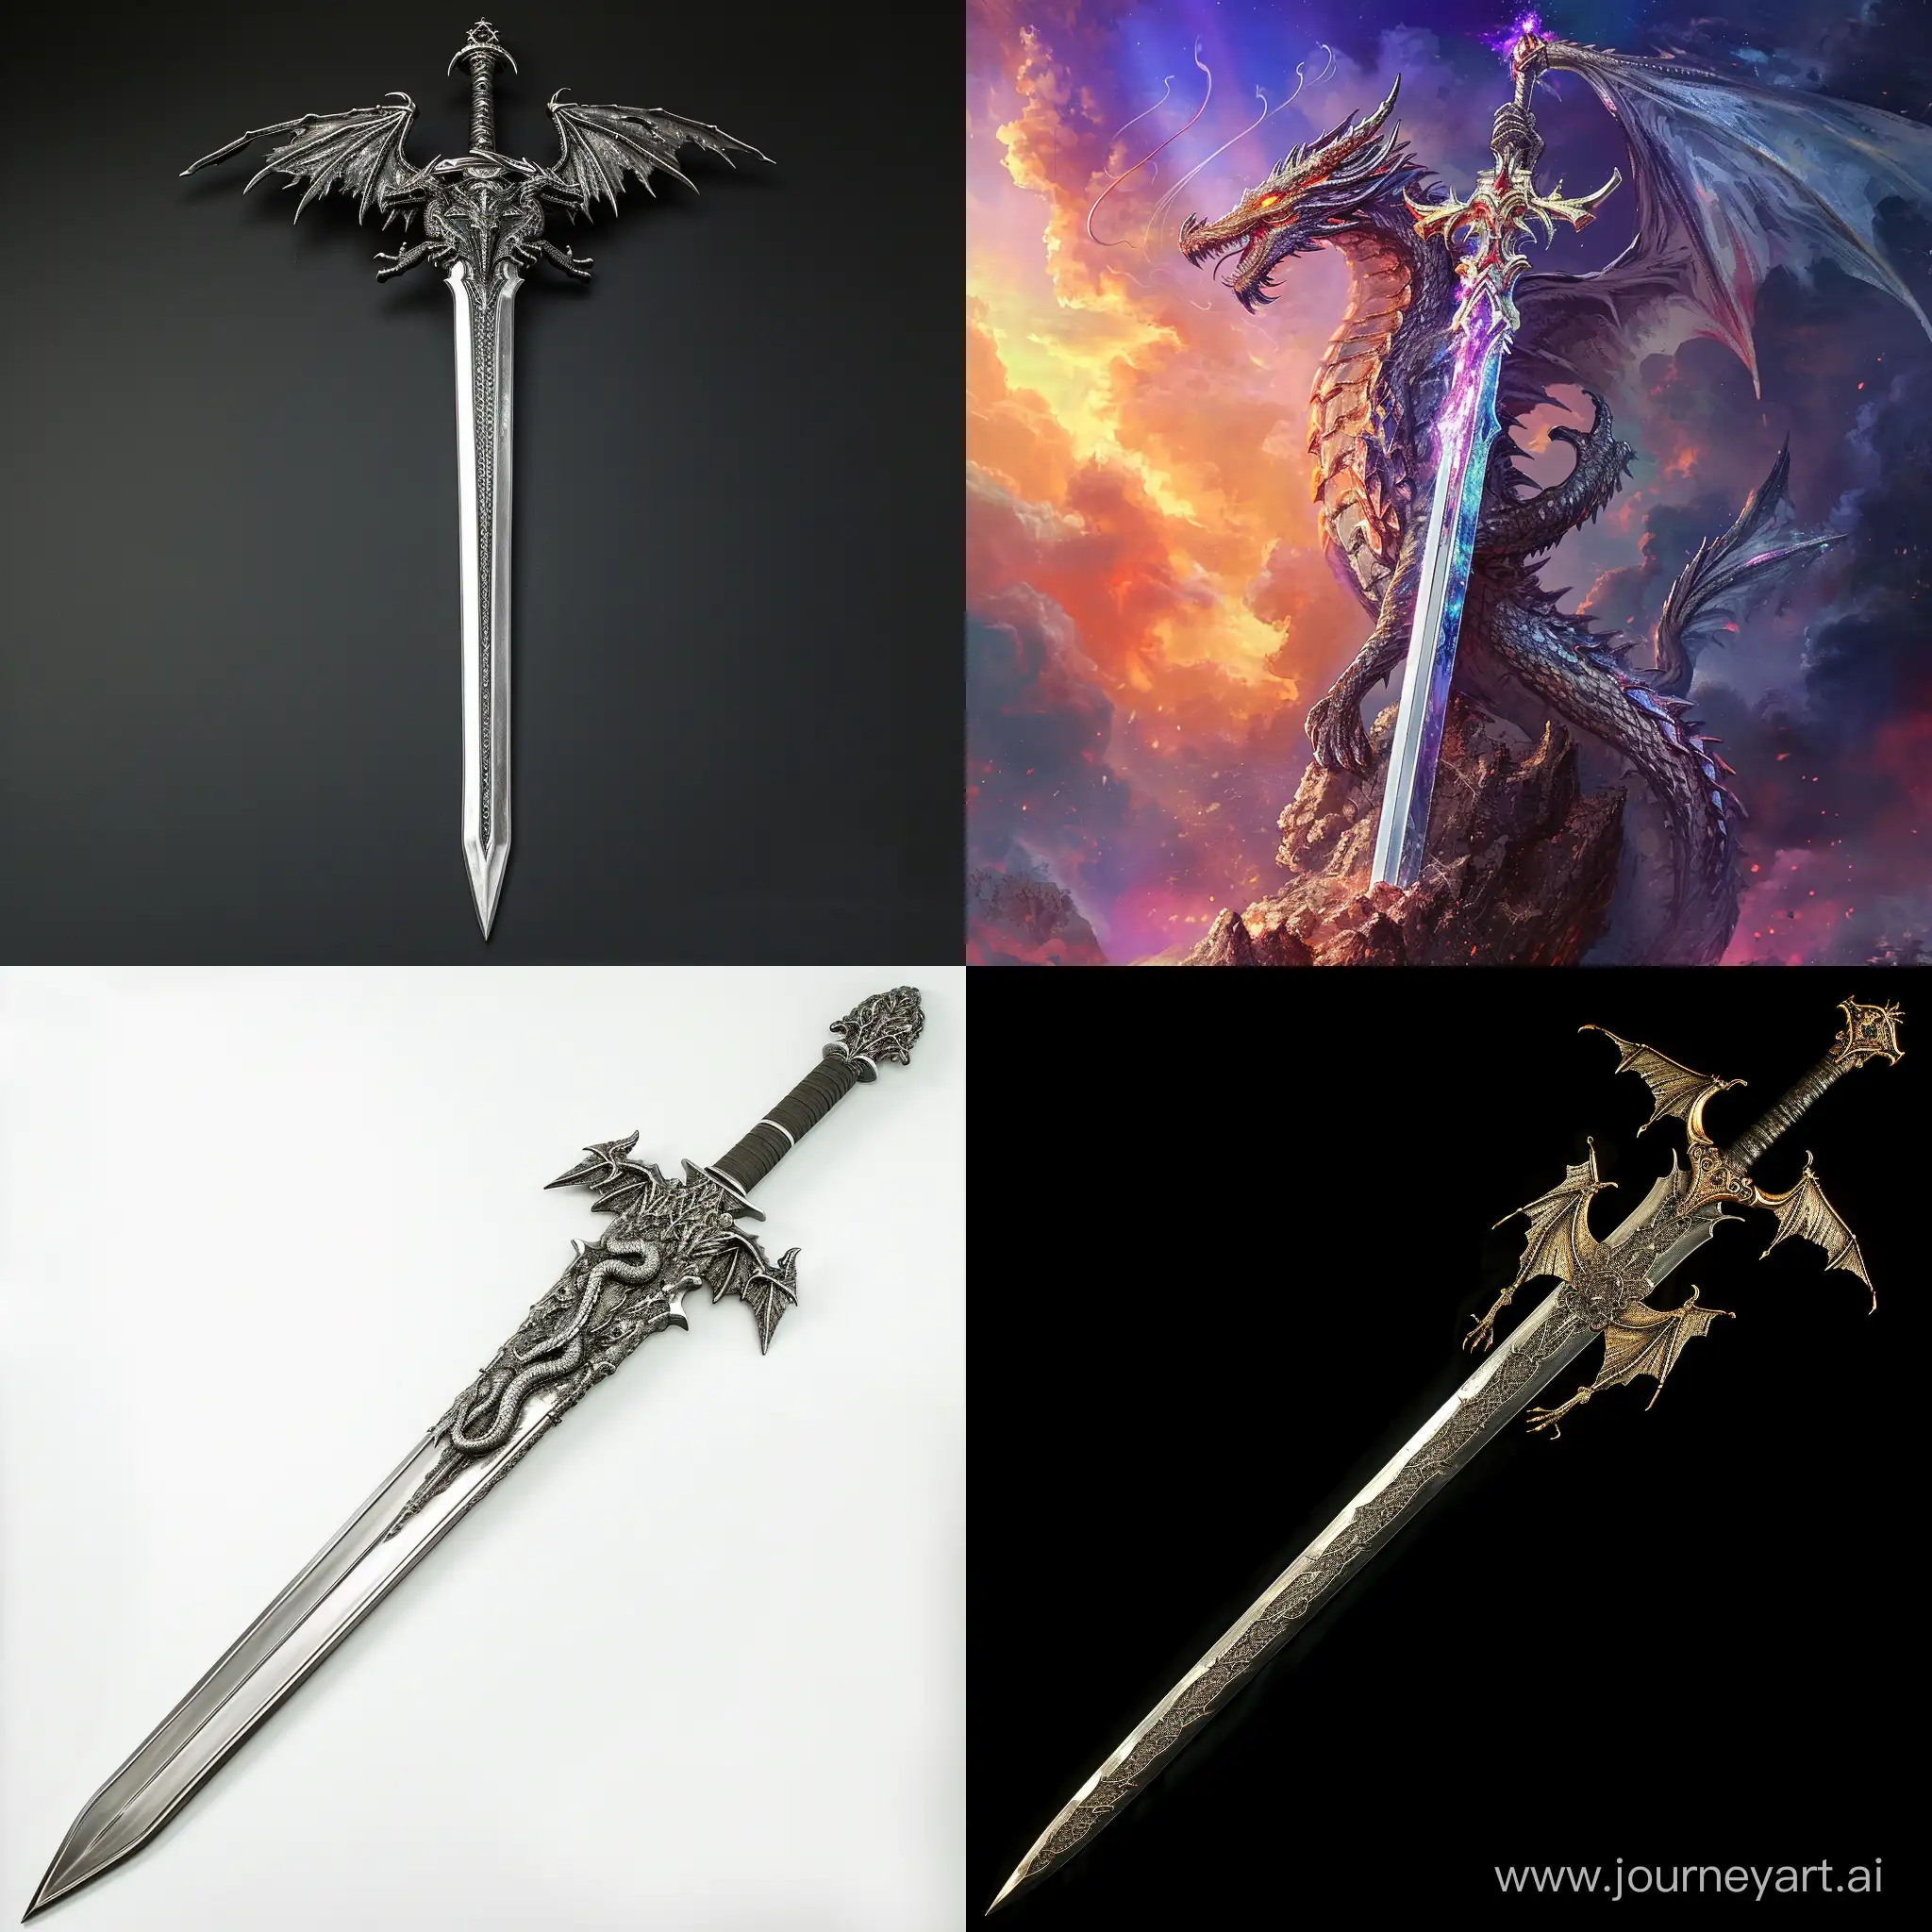 Majestic-Dragon-Sword-Artwork-with-Version-6-and-Aspect-Ratio-11